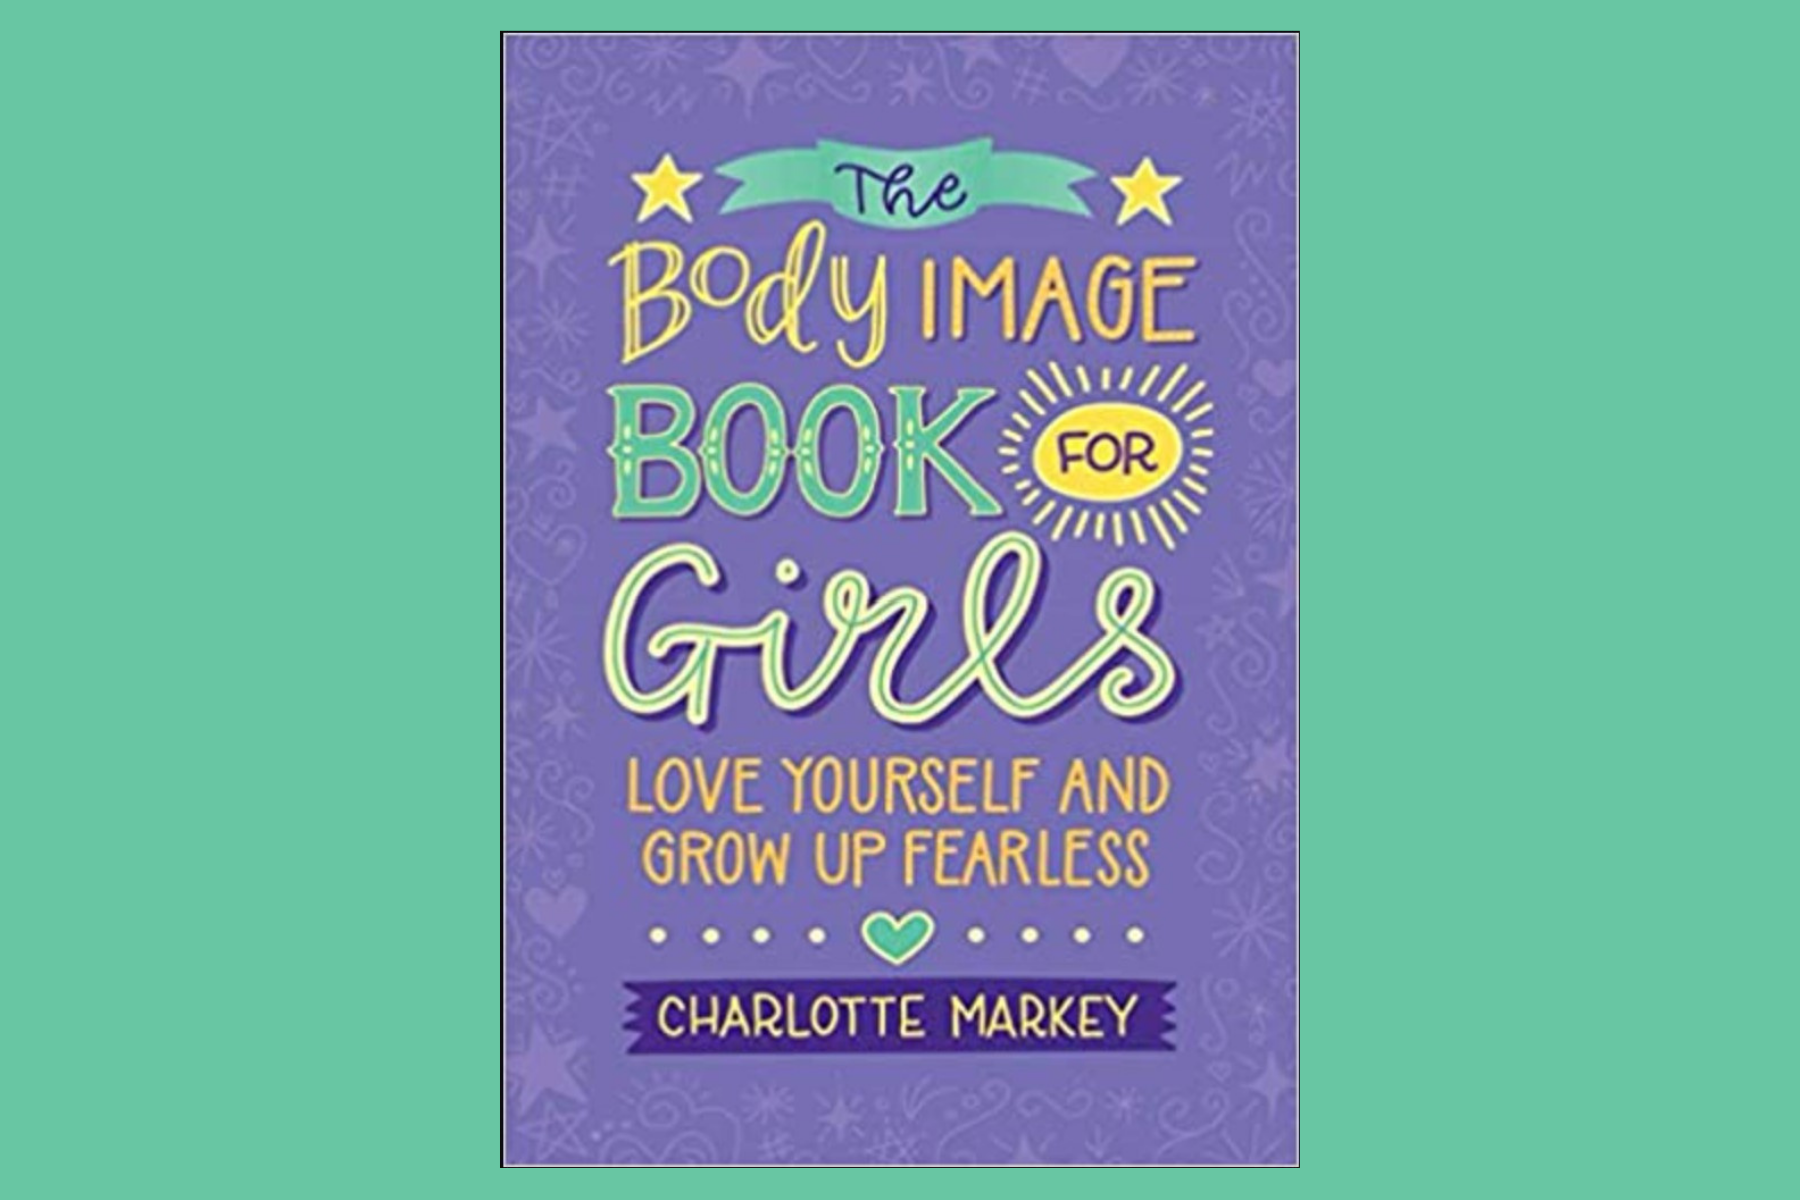 The Body Image Book for Girls: Love Yourself and Grow Up Fearless